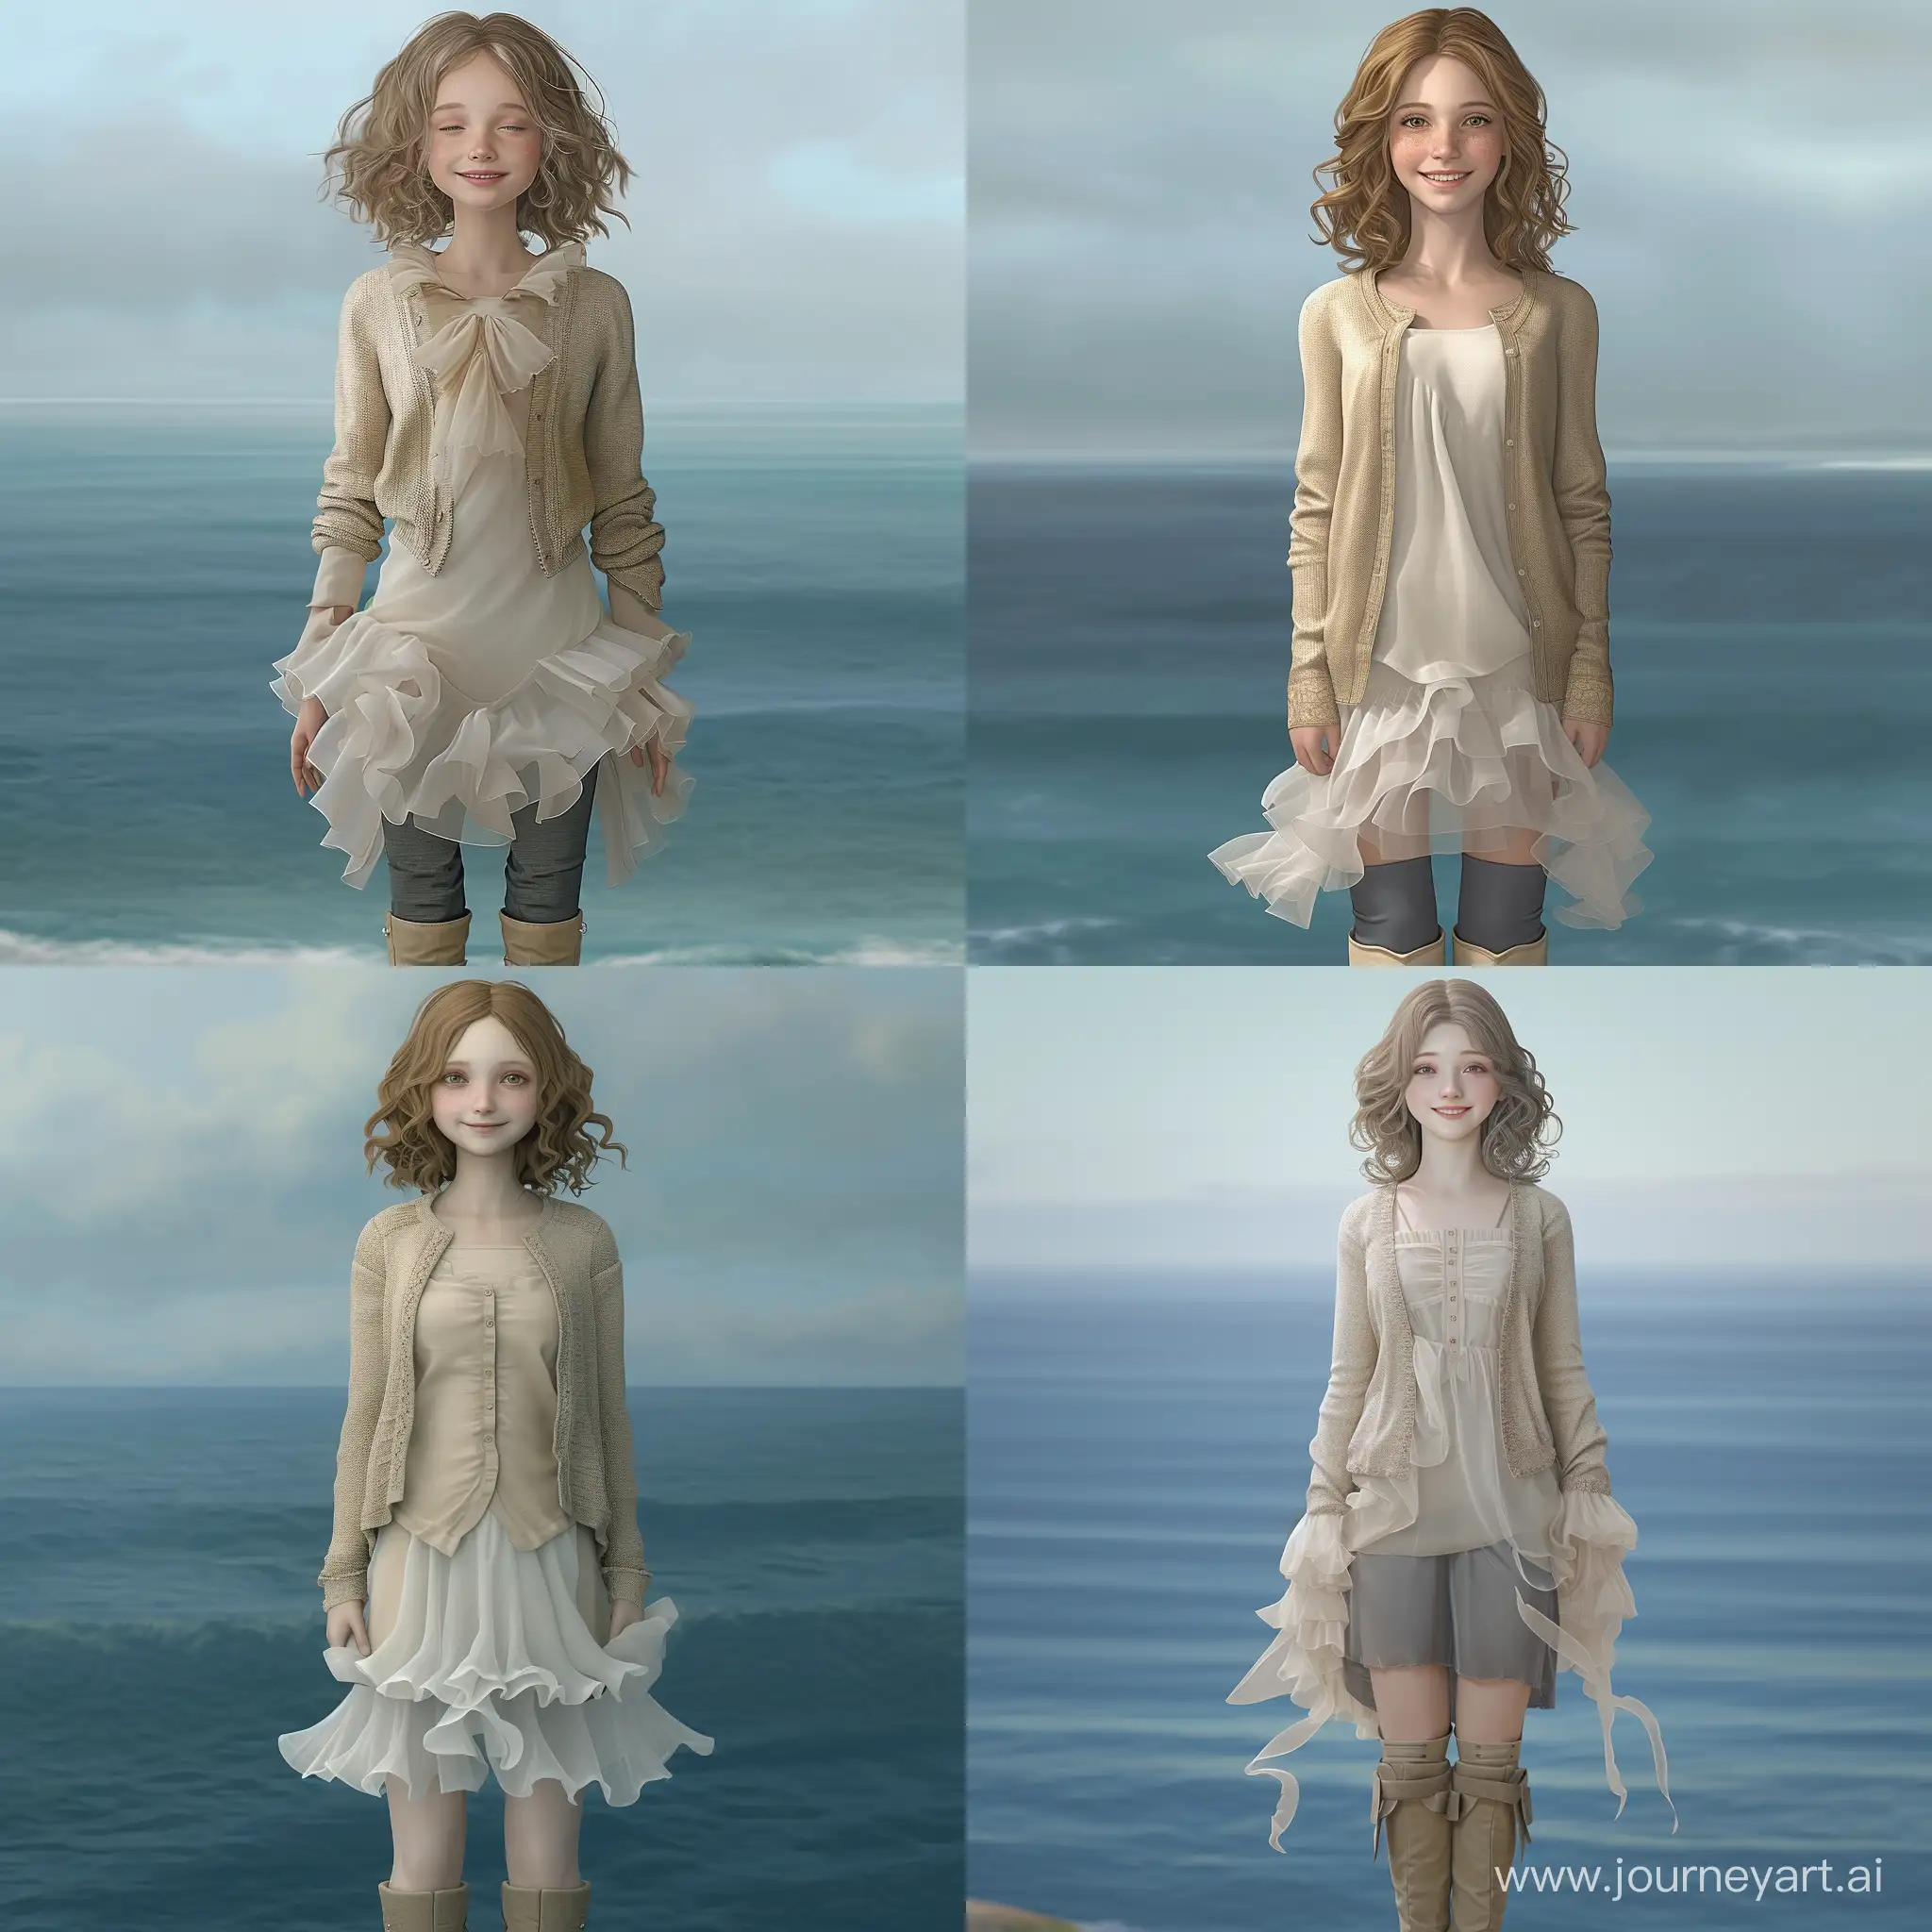 1girl, solo, pale skin, brown eyes, light brown hair, shoulder length hair, slightly curly hair, smile, closed mouth, calm, beige knee-length tunic, beige cardigan, dark gray trousers, beige knee-high boots, white trasparent dress, ruffles, portrait, waist, blue background, blue ocean, blue and gray theme, calm atmosphere, facing the viewer, looking forward,3 D Epic Realistic,detalid.